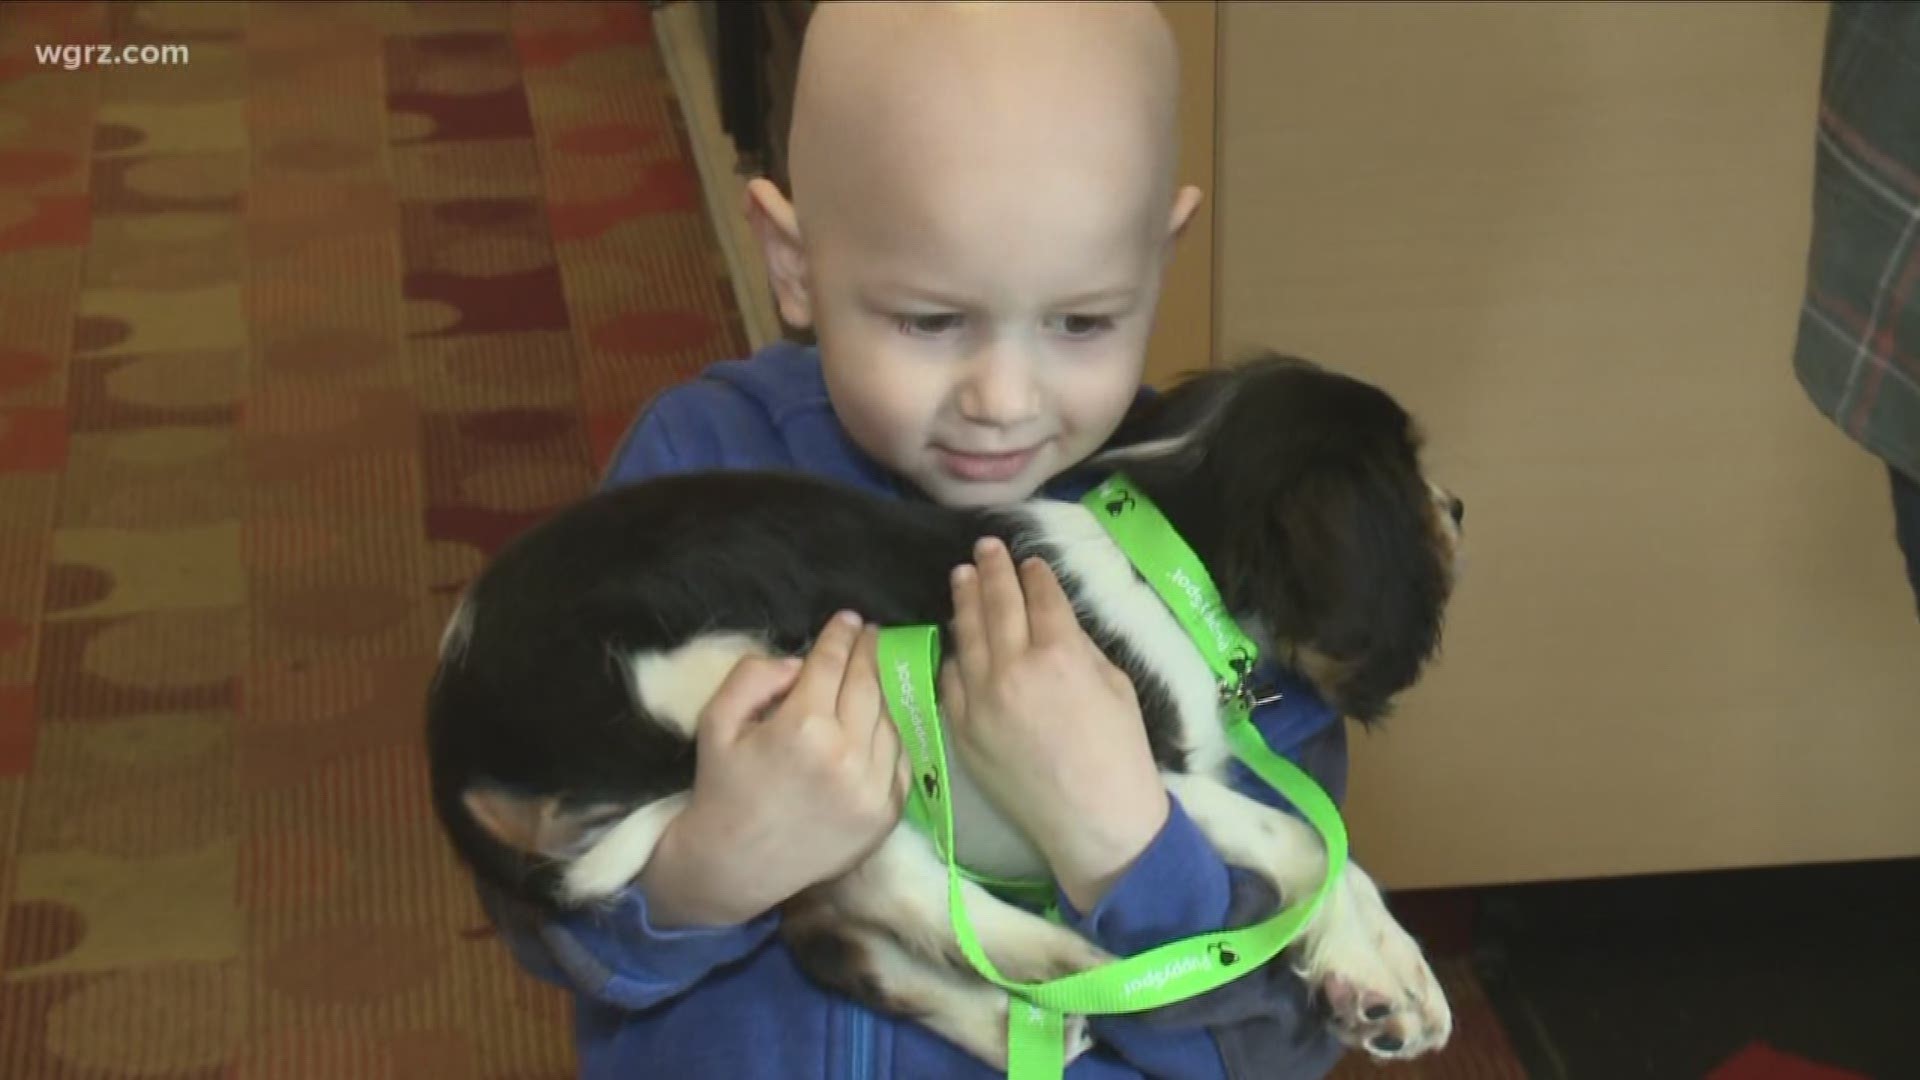 4-year-old Alex Tingley is battling leukemia. Wait until you see the surprise gift he receives.